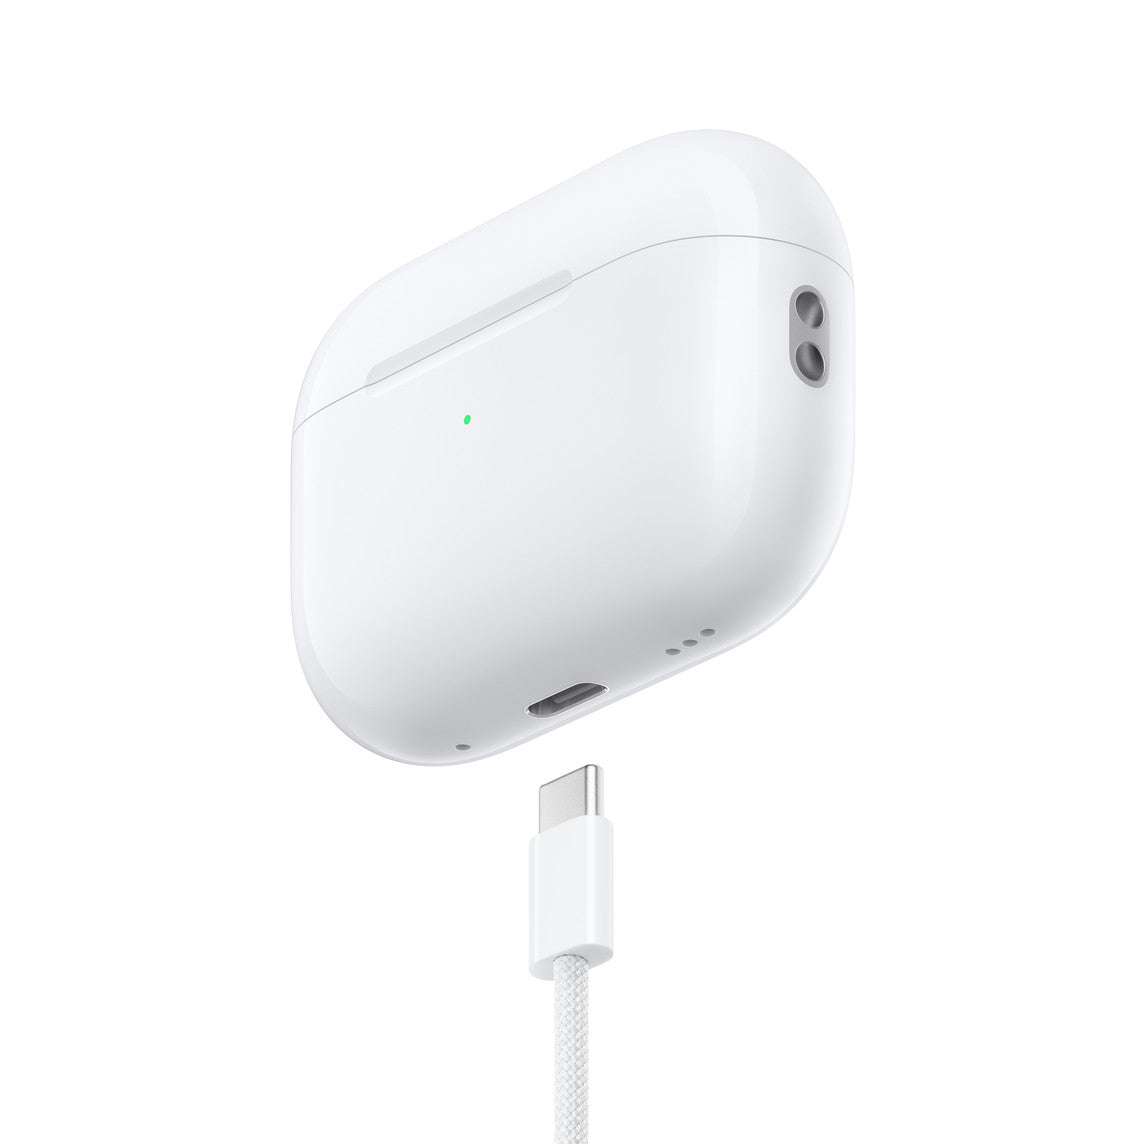 Apple AirPods Pro (2nd generation) with MagSafe Charging Case (USB‑C) with 1-year official Apple warranty